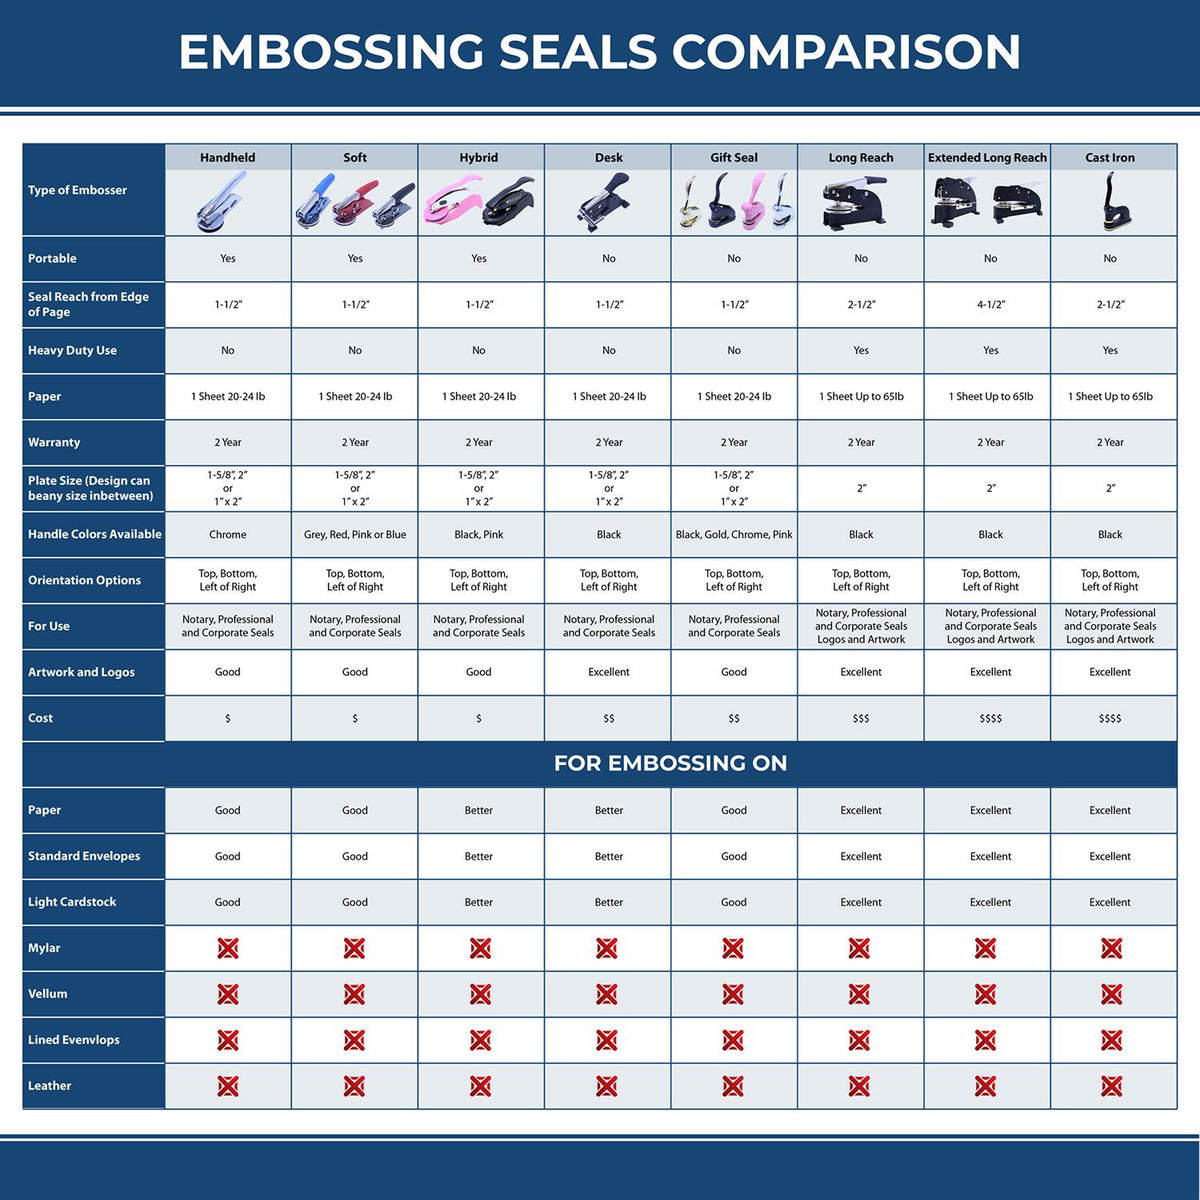 A comparison chart for the different types of mount models available for the Heavy Duty Cast Iron Iowa Architect Embosser.